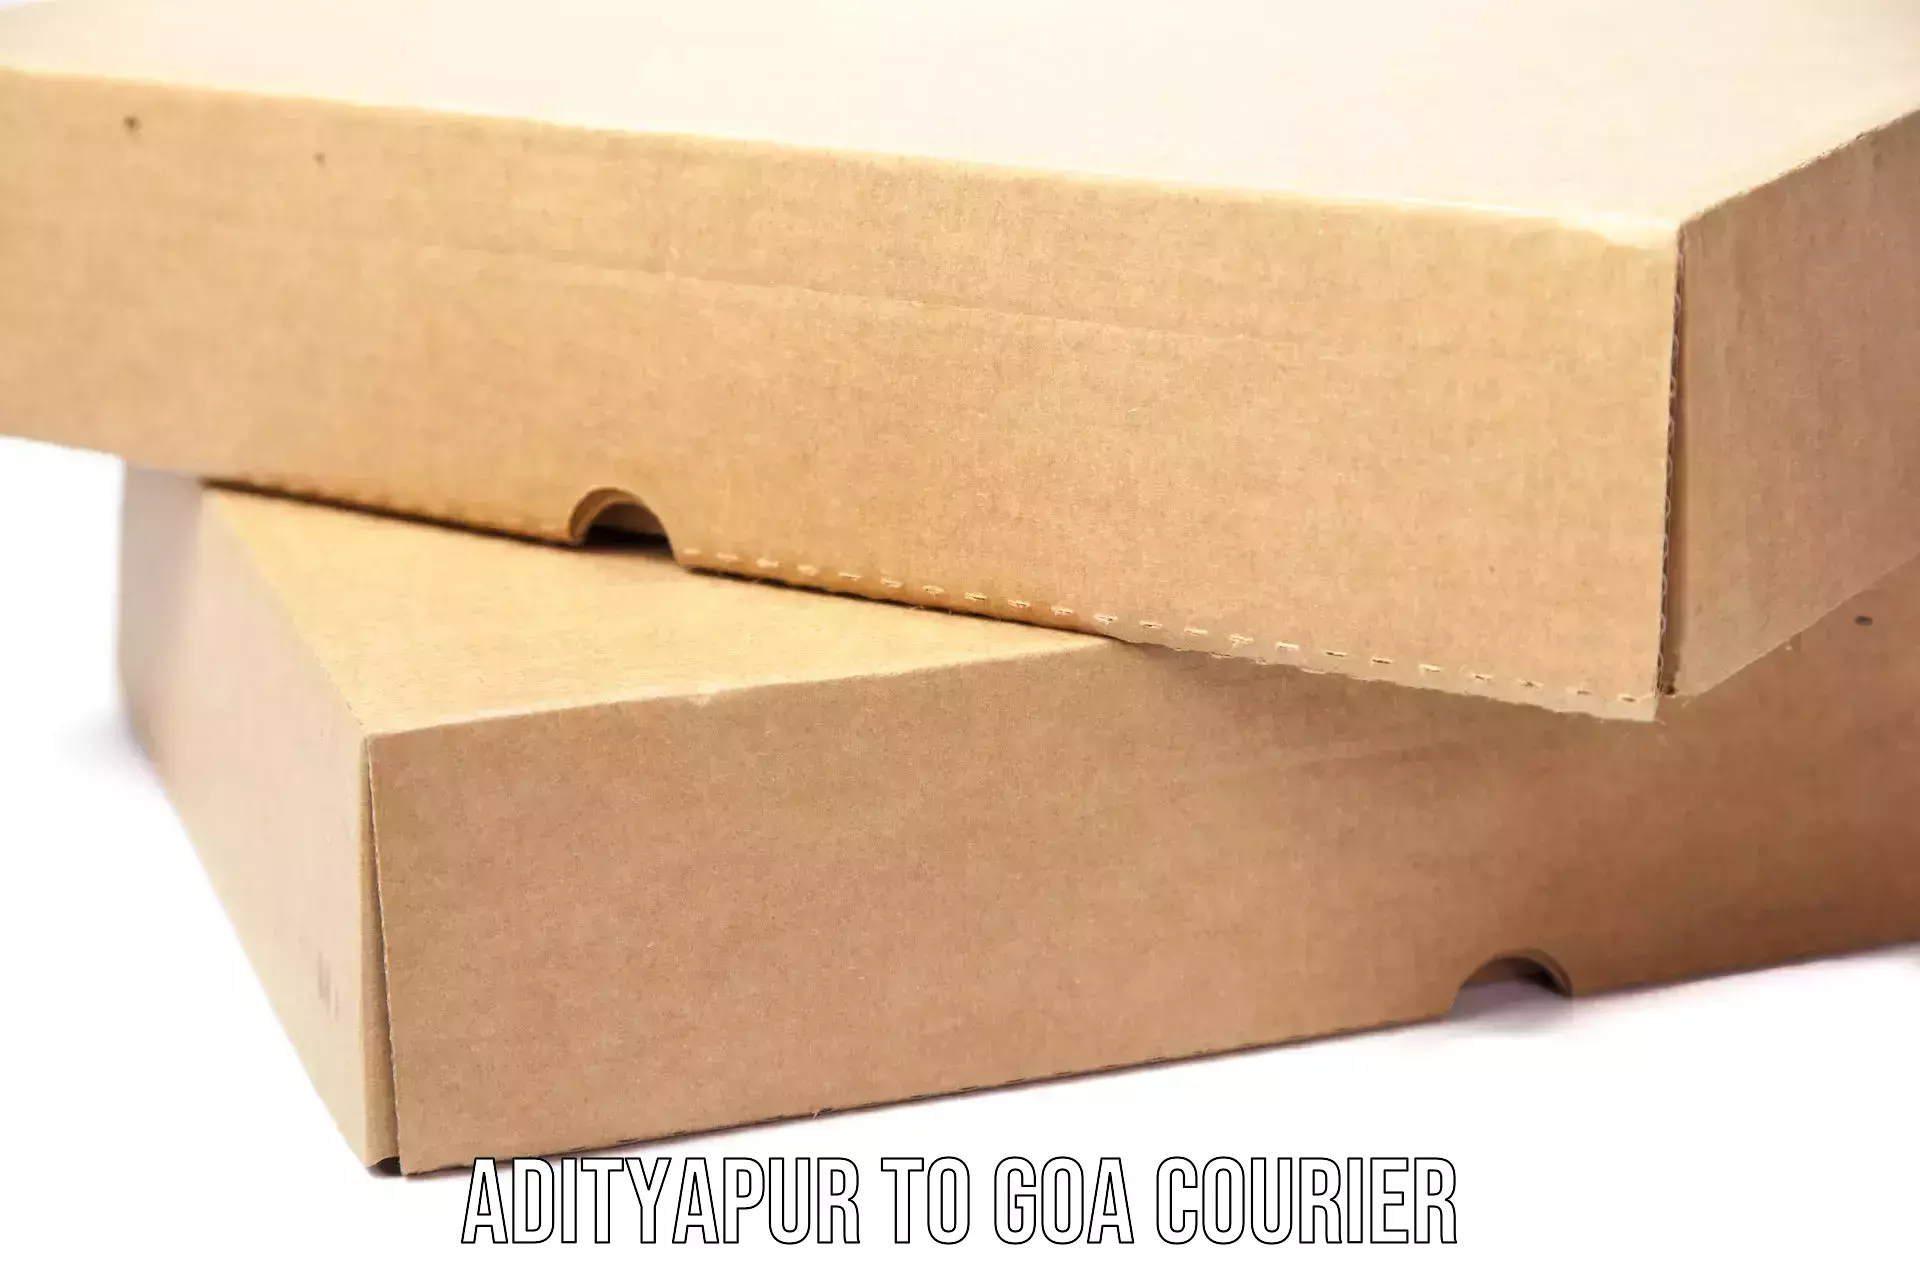 Parcel handling and care Adityapur to Goa